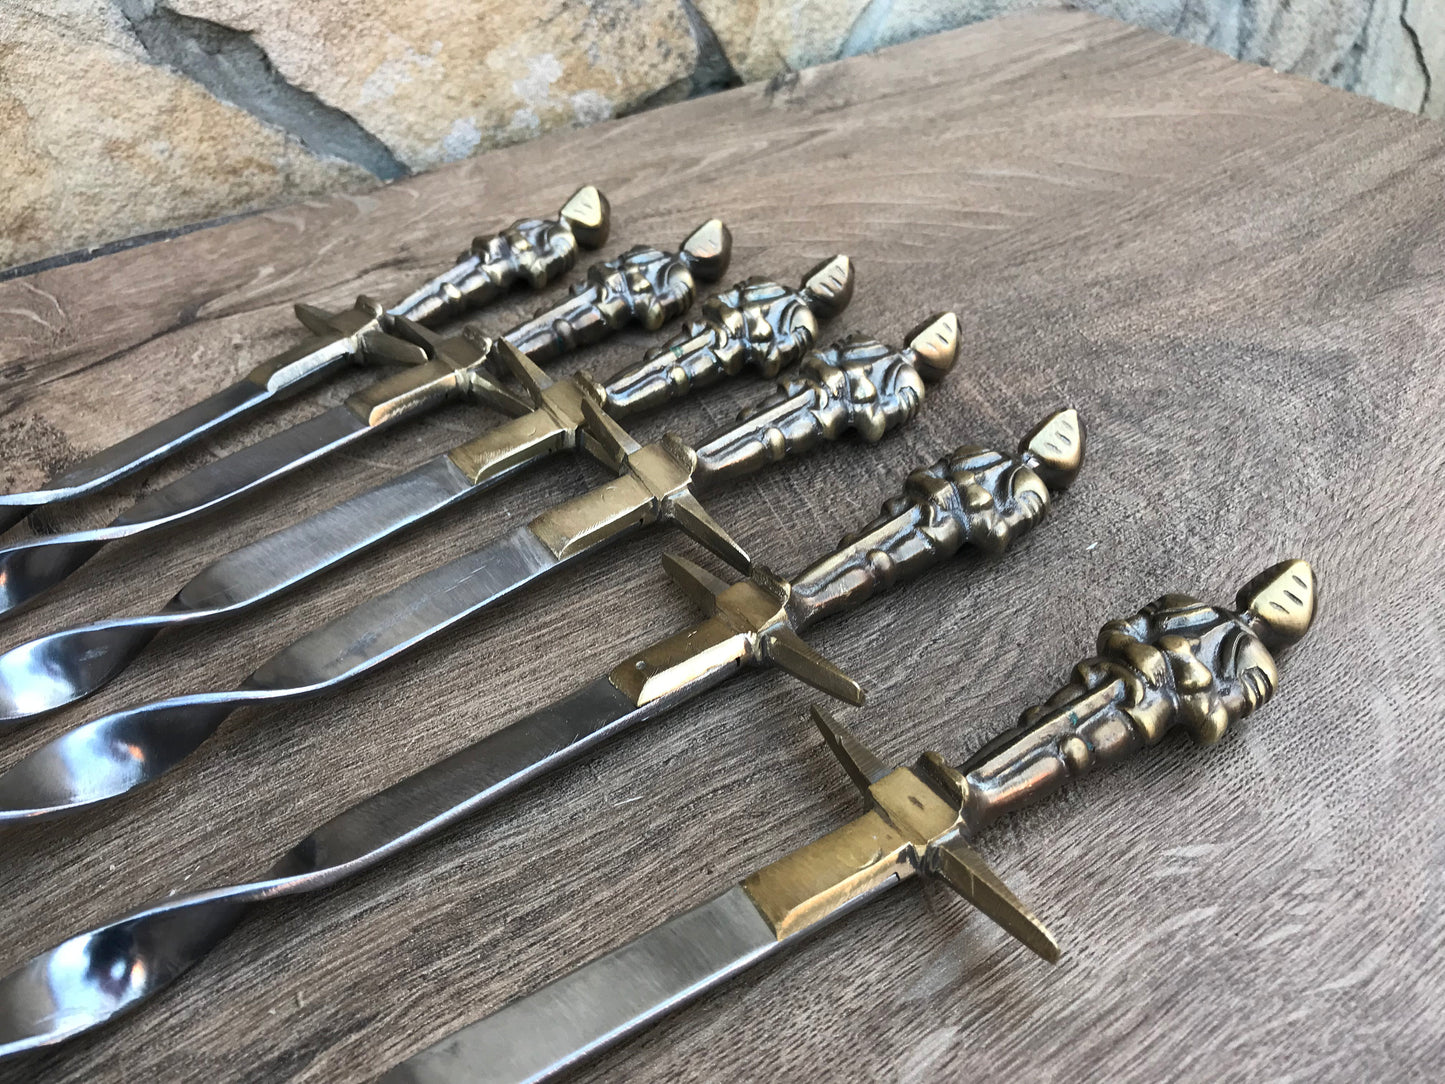 Viking food, skewers, viking skewers, grill tools, pricker, Middle Ages, camp equipment, LARP. SCA, reenactment,medieval,picnic,gift for dad